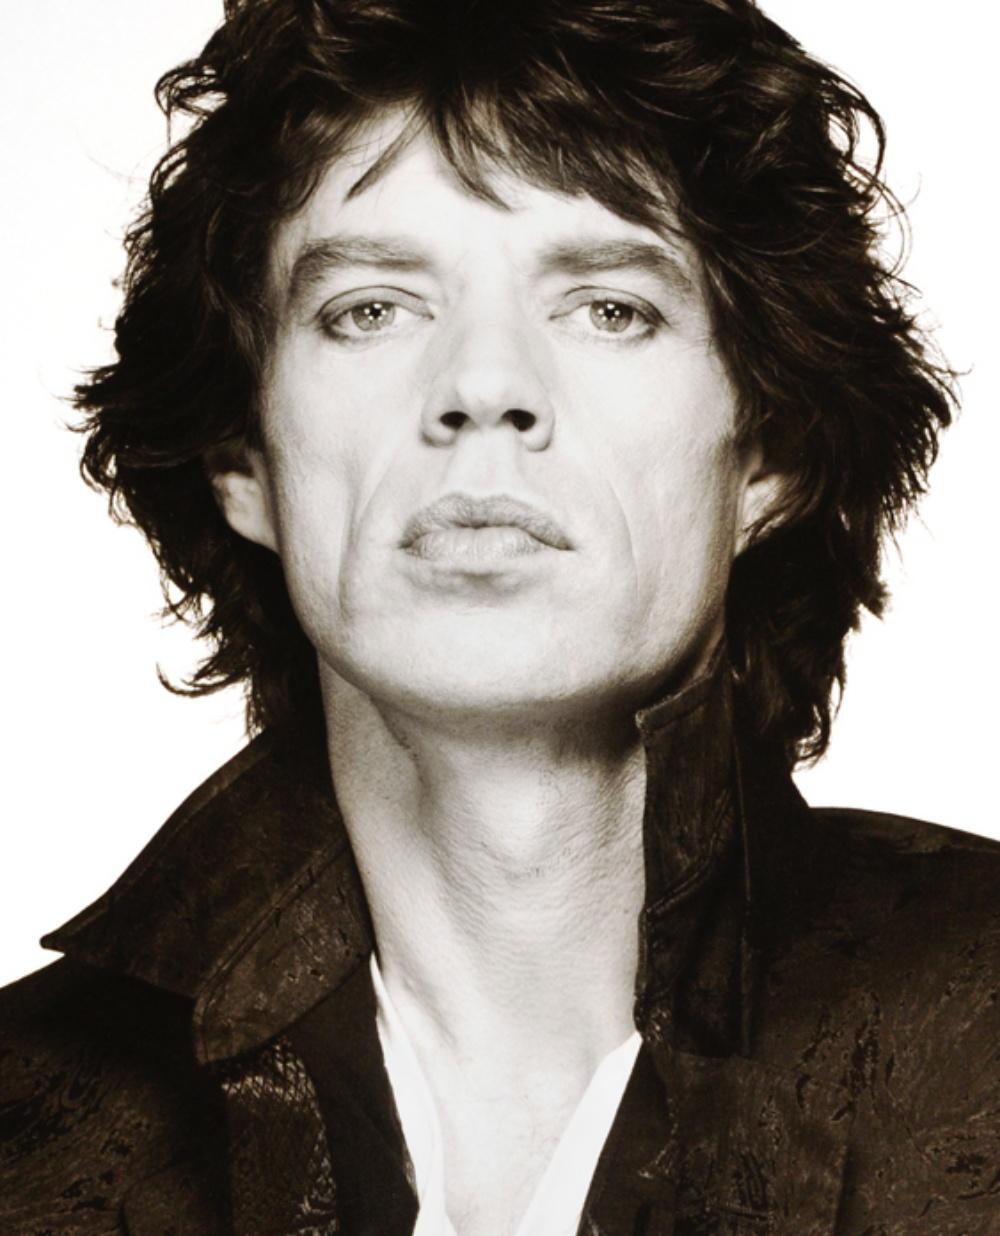 ALBERT WATSON (*1942, Scotland)
Mick Jagger, New York City, 1989
Vintage silver gelatin print
Sheet 50,8 x 40,64 cm (20 x 16 in.)
Unique
Print only

Albert Watson was born 1942 in Edinburgh, Scotland.

He currently lives and works in New York. A